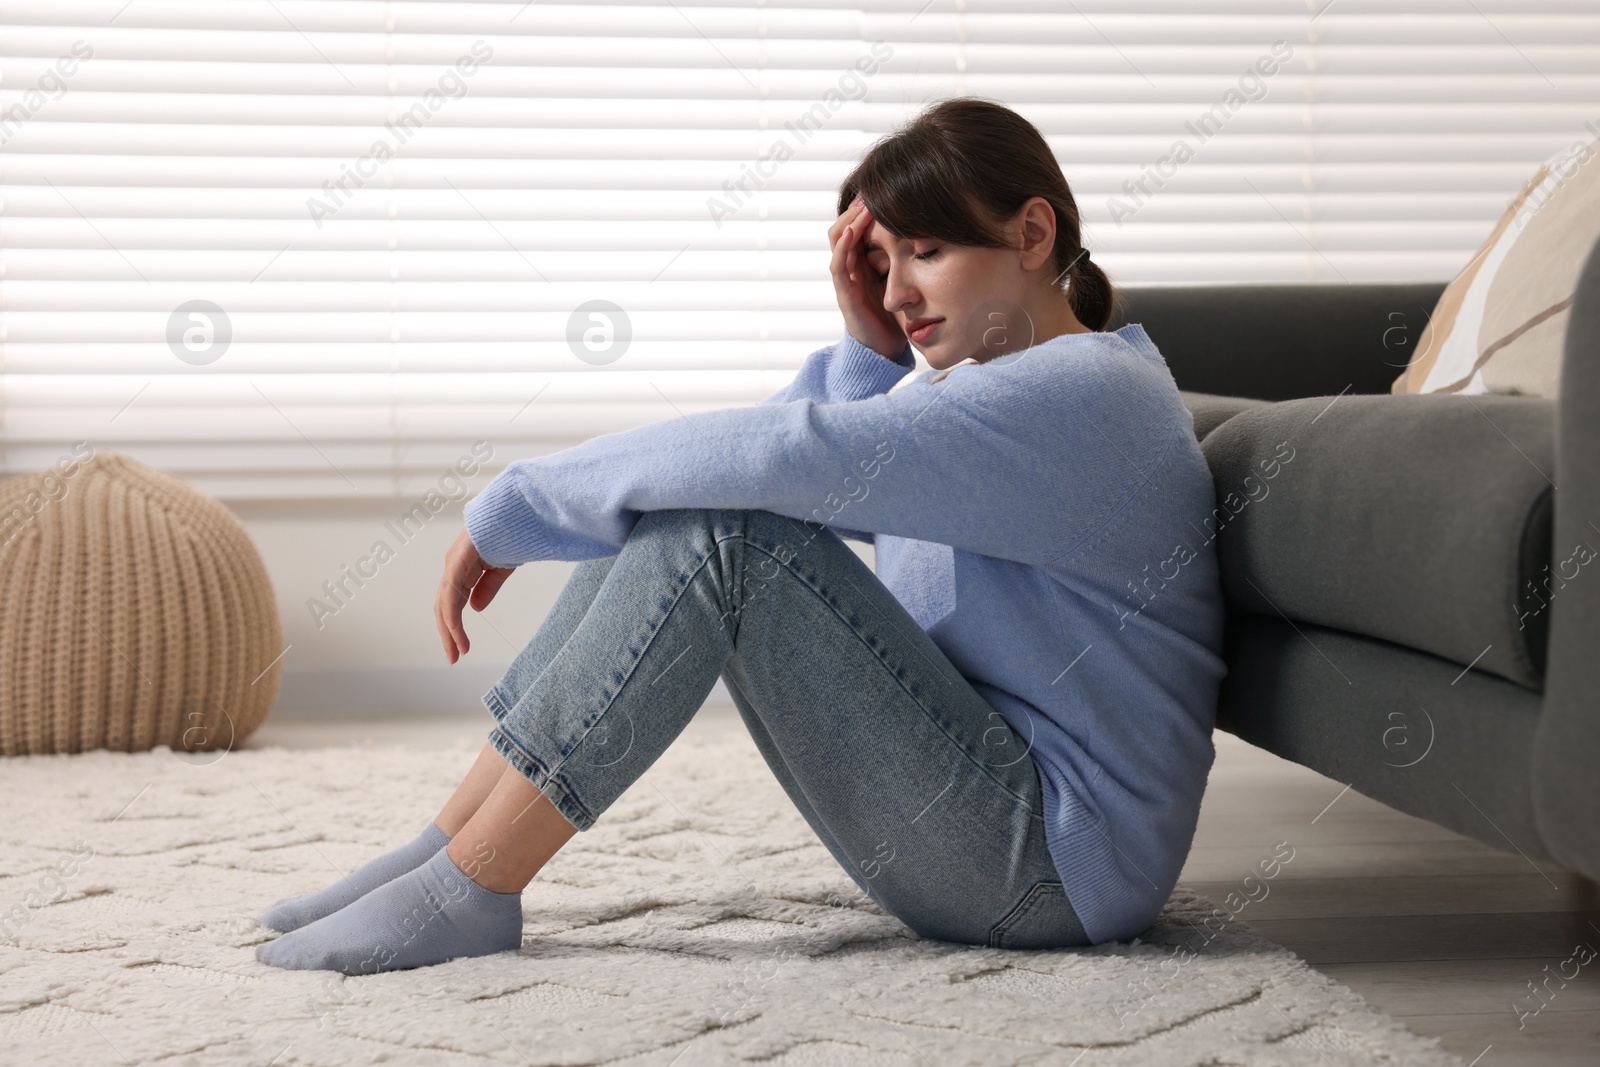 Photo of Loneliness concept. Sad woman sitting on floor at home